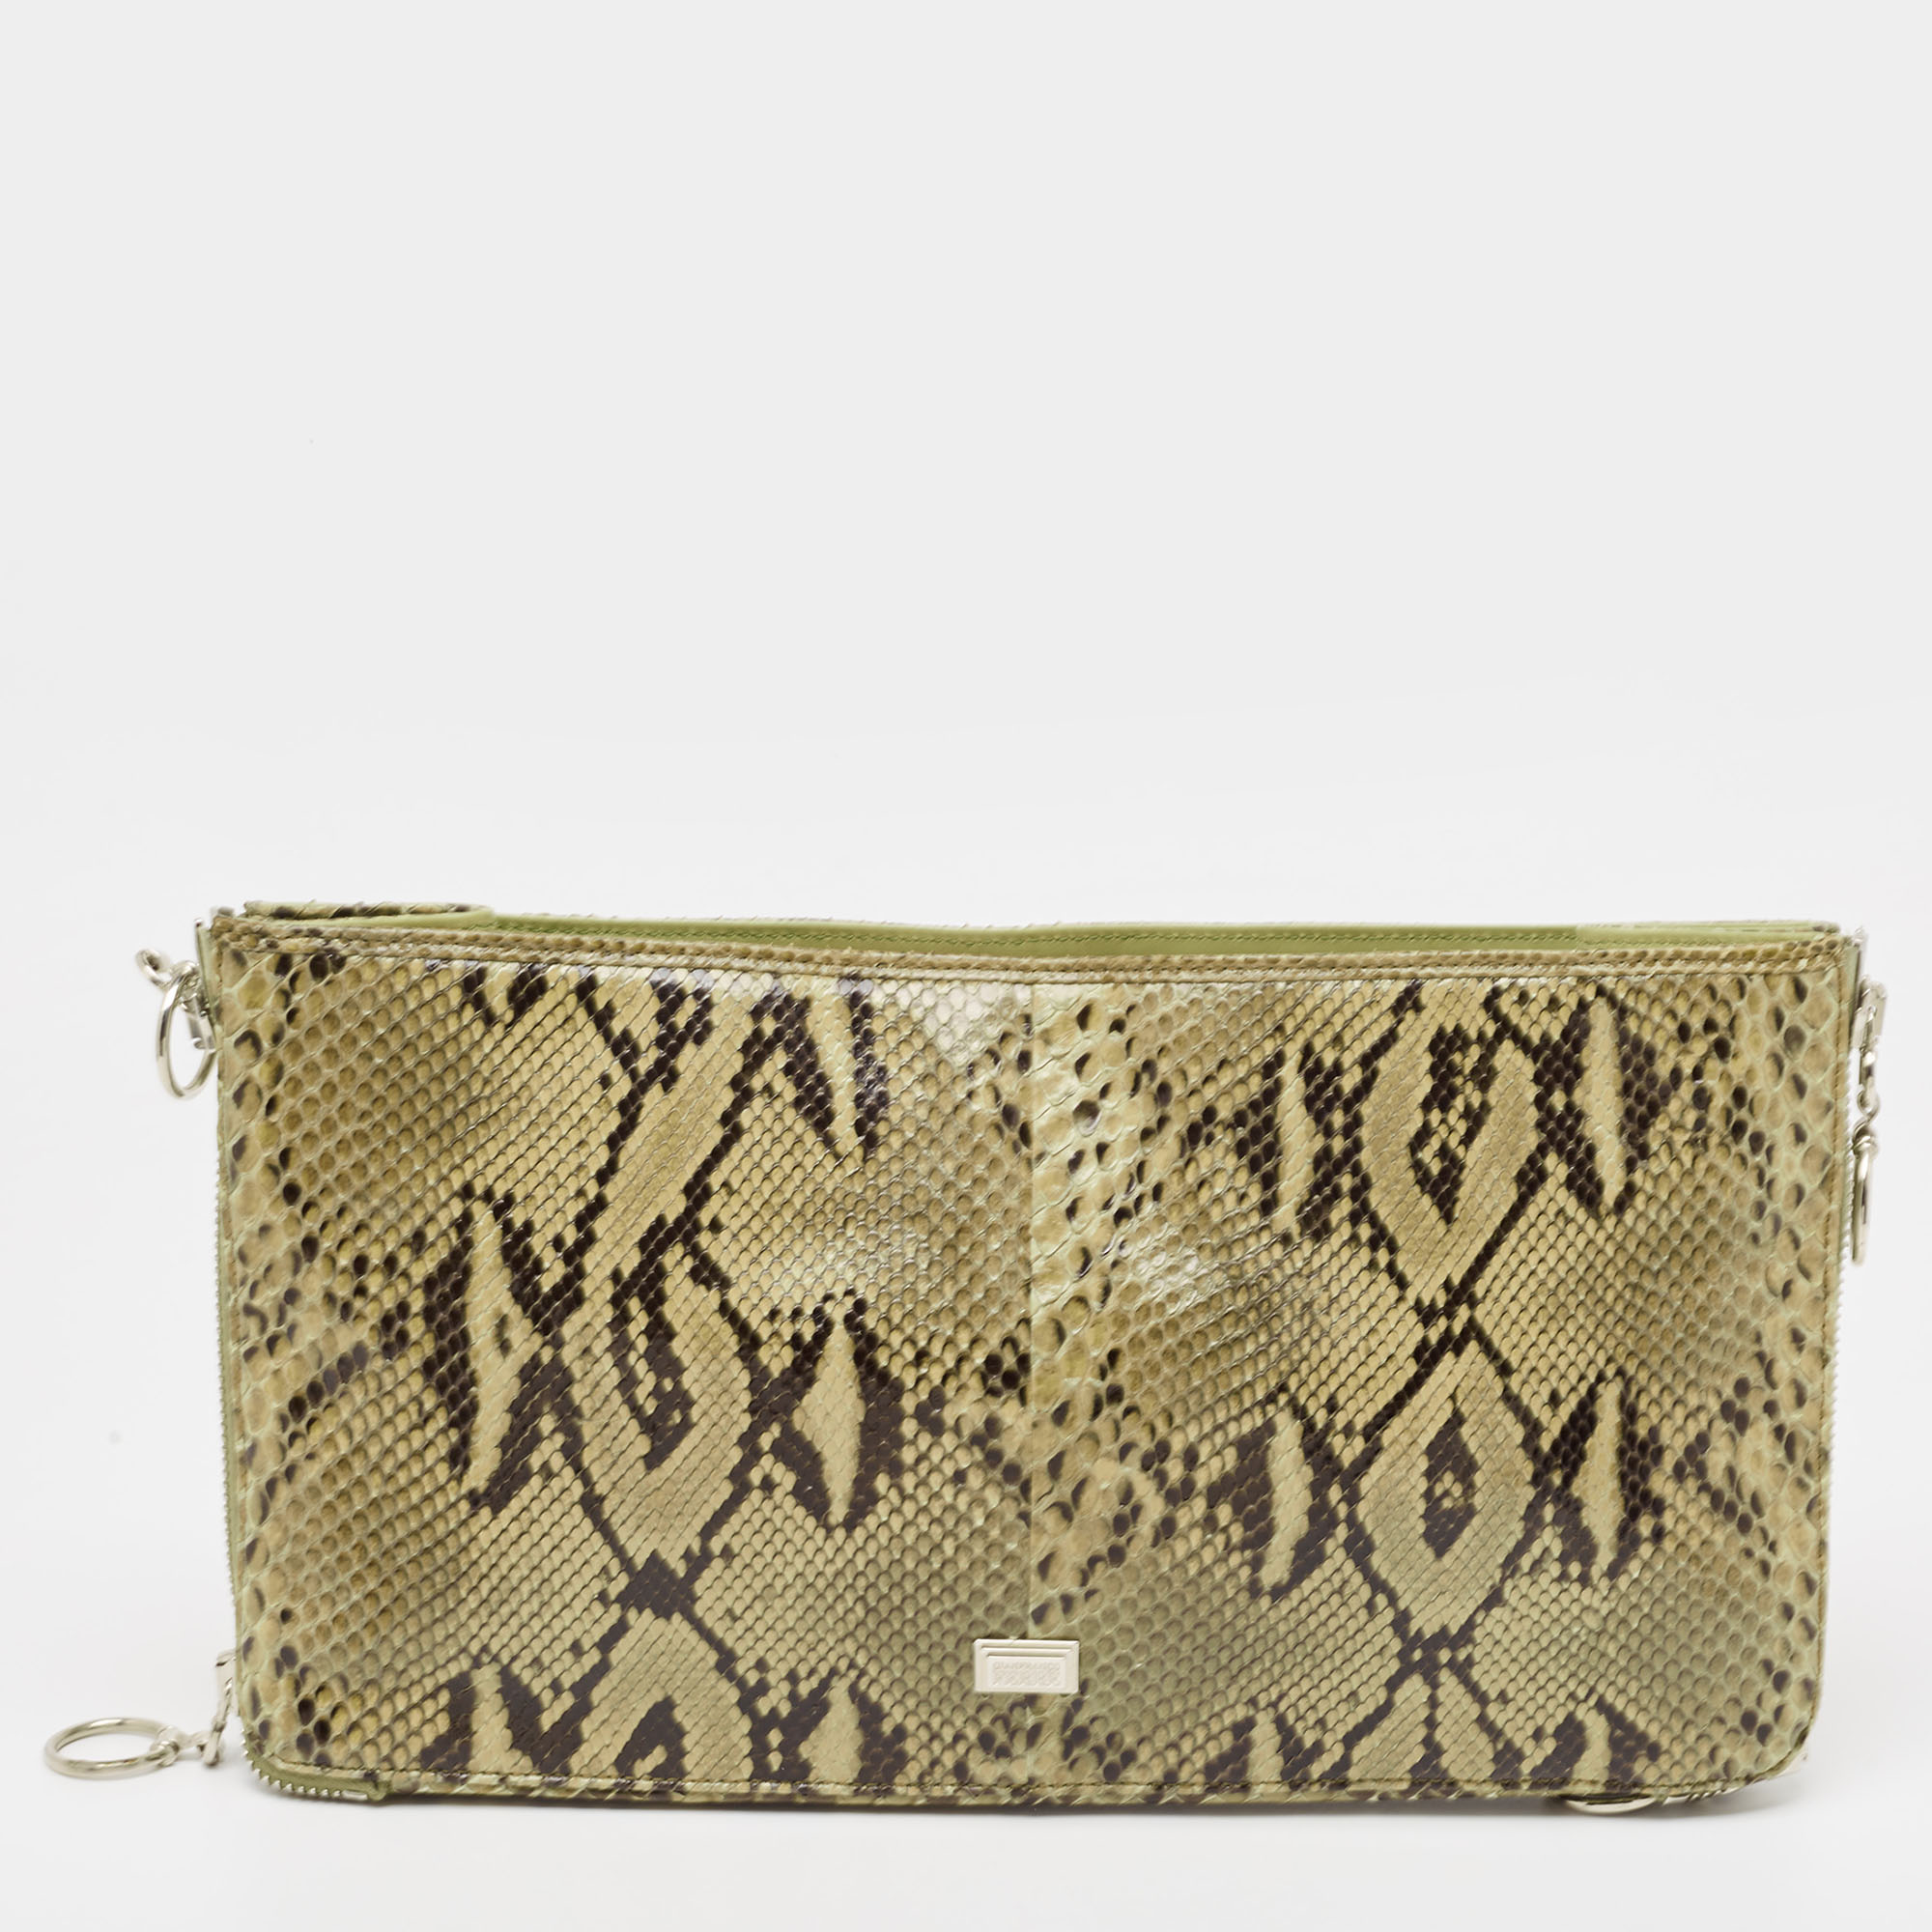 Pre-owned Gianfranco Ferre Olive Green Python Oversized Zip Clutch